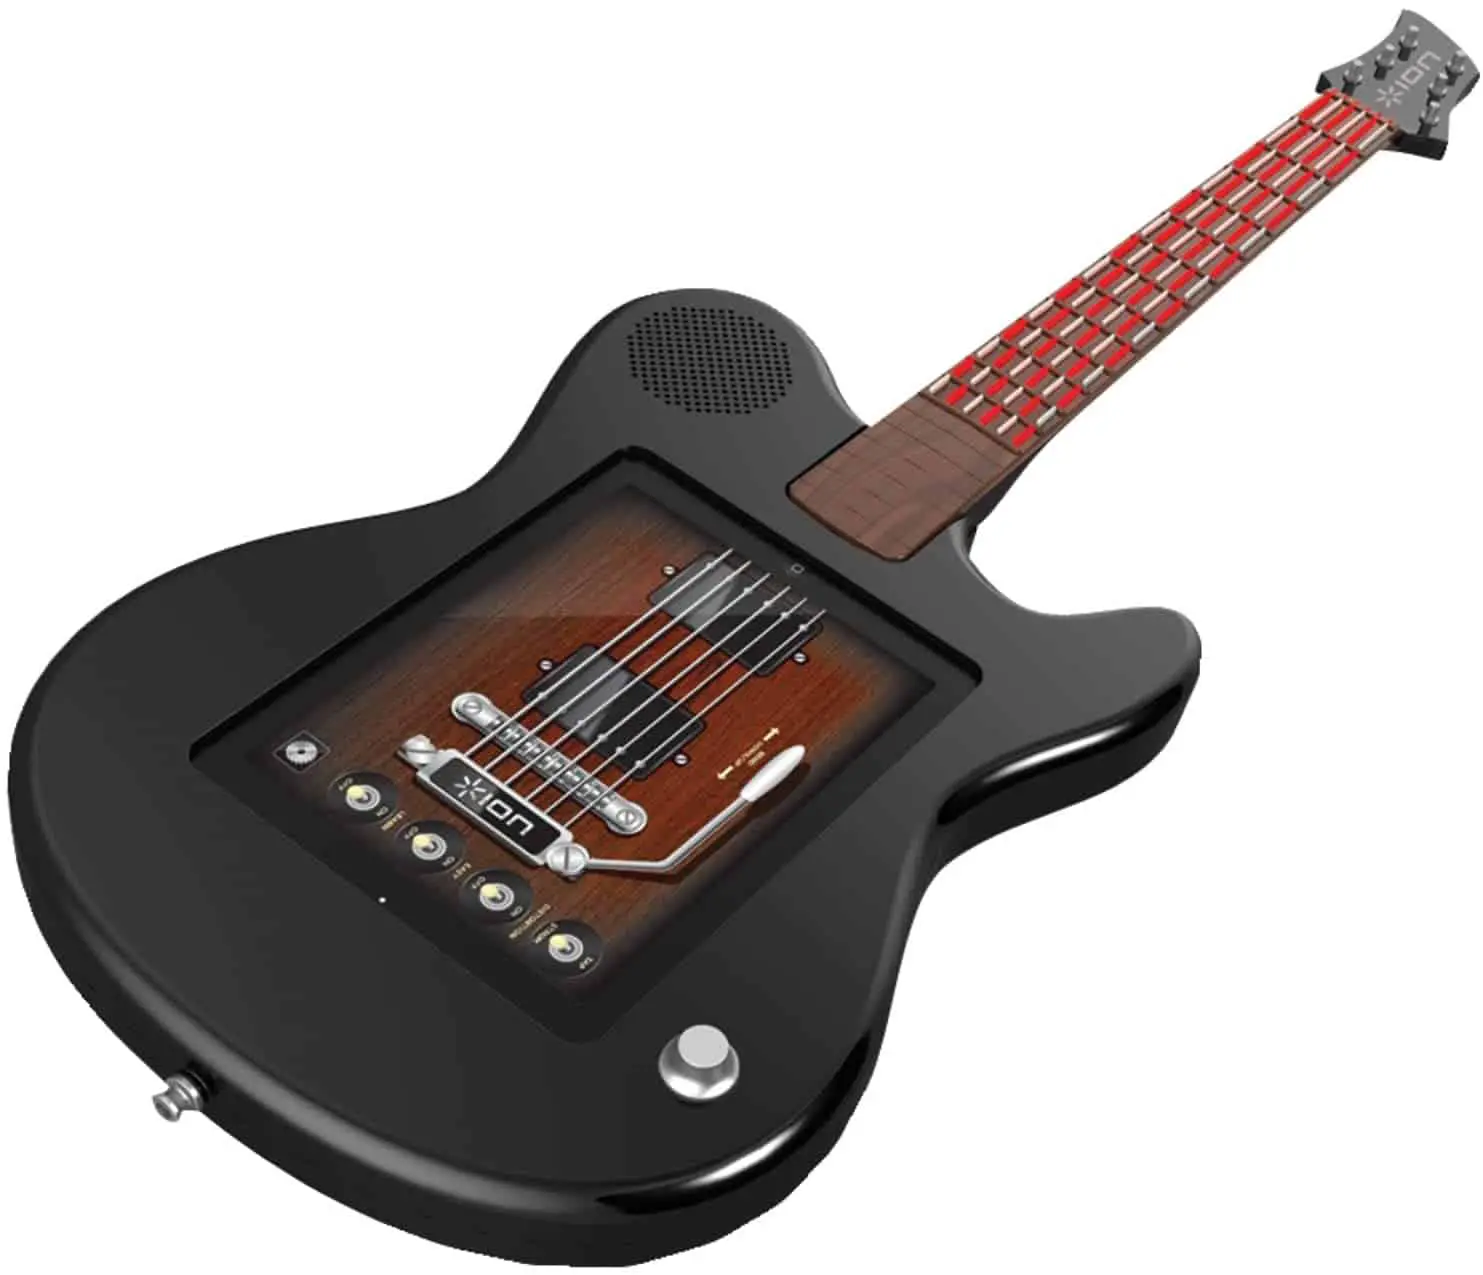 Best guitar for iPad & iPhone- ION All-Star Guitar Electronic Guitar System for iPad 2 and 3